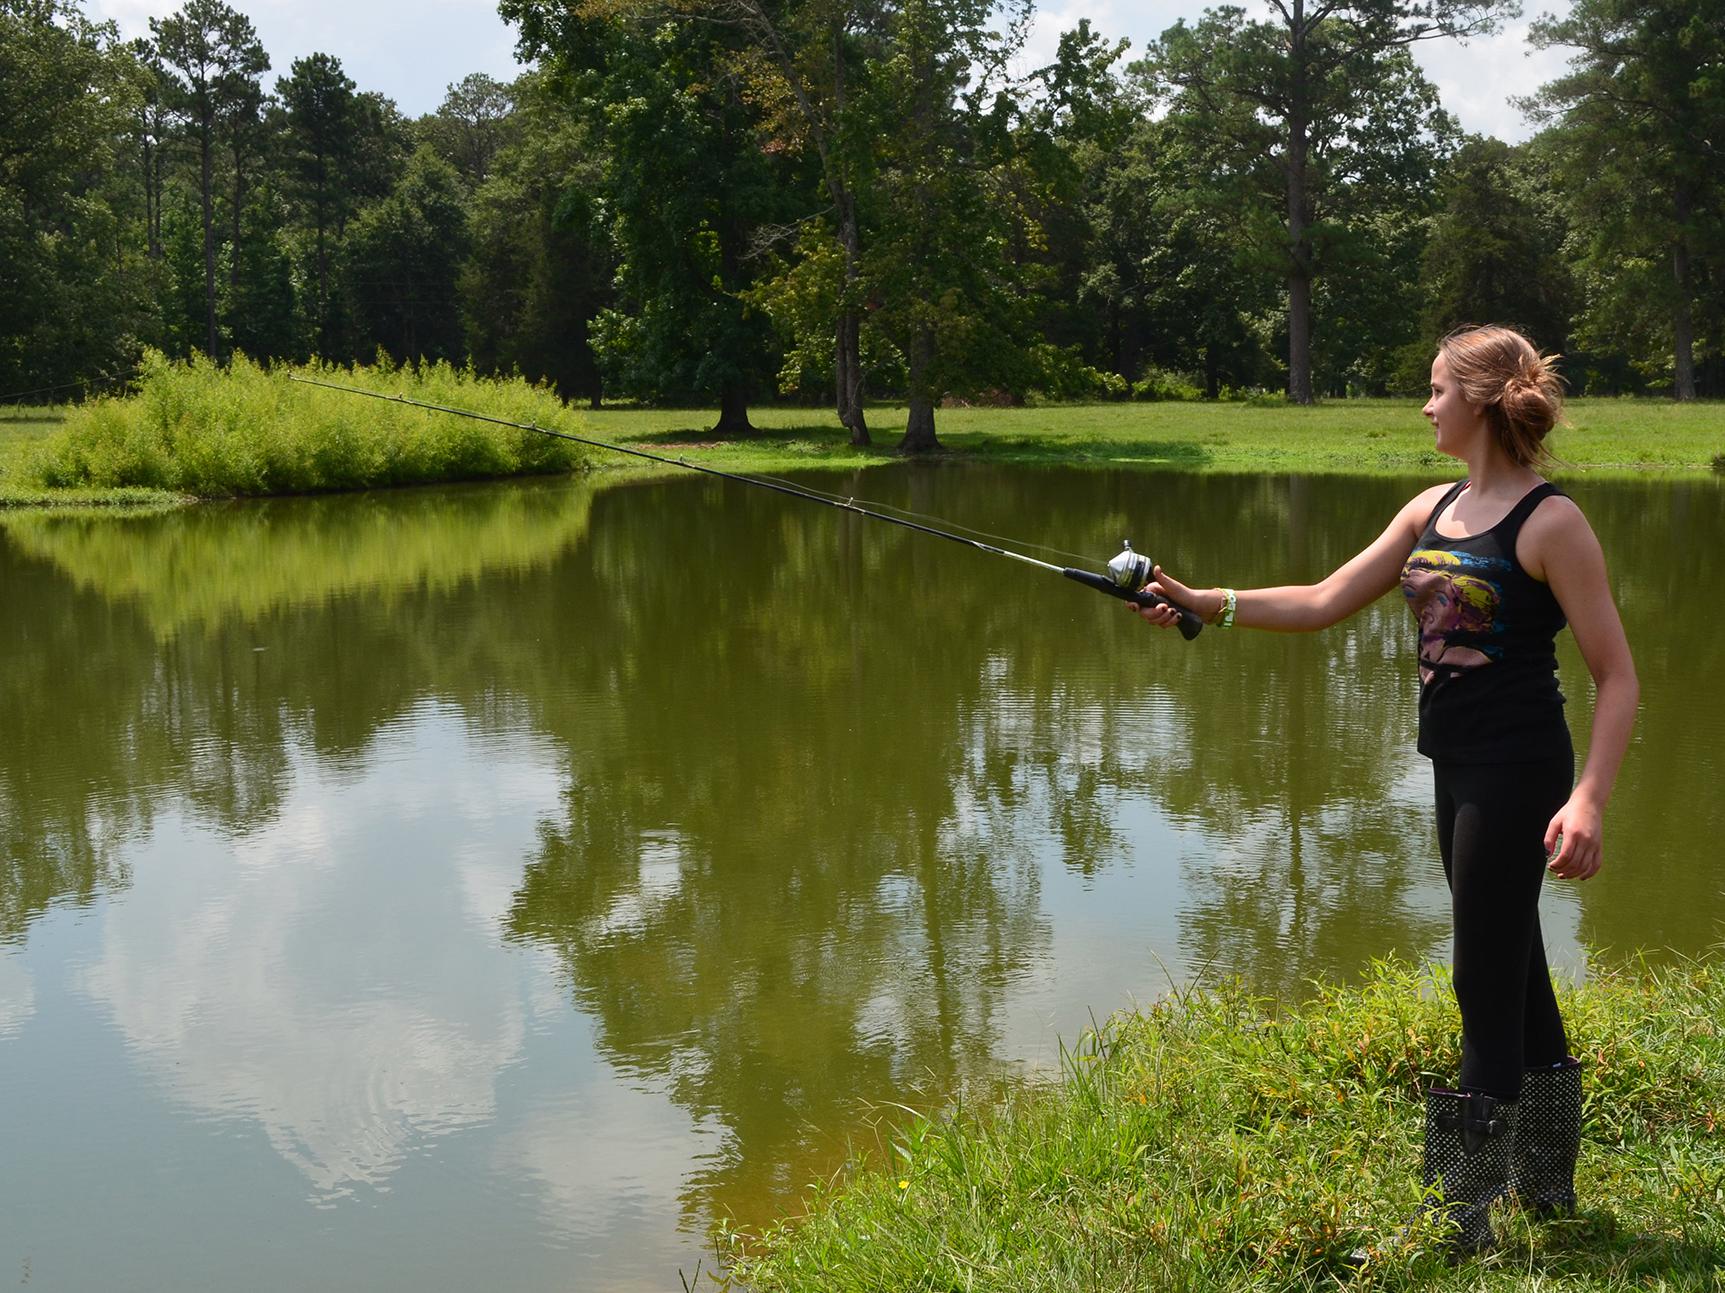 With proper stocking ratios and active management, small ponds can provide fun fishing opportunities and food for the table. (File photo by MSU Extension Service/Linda Breazeale)